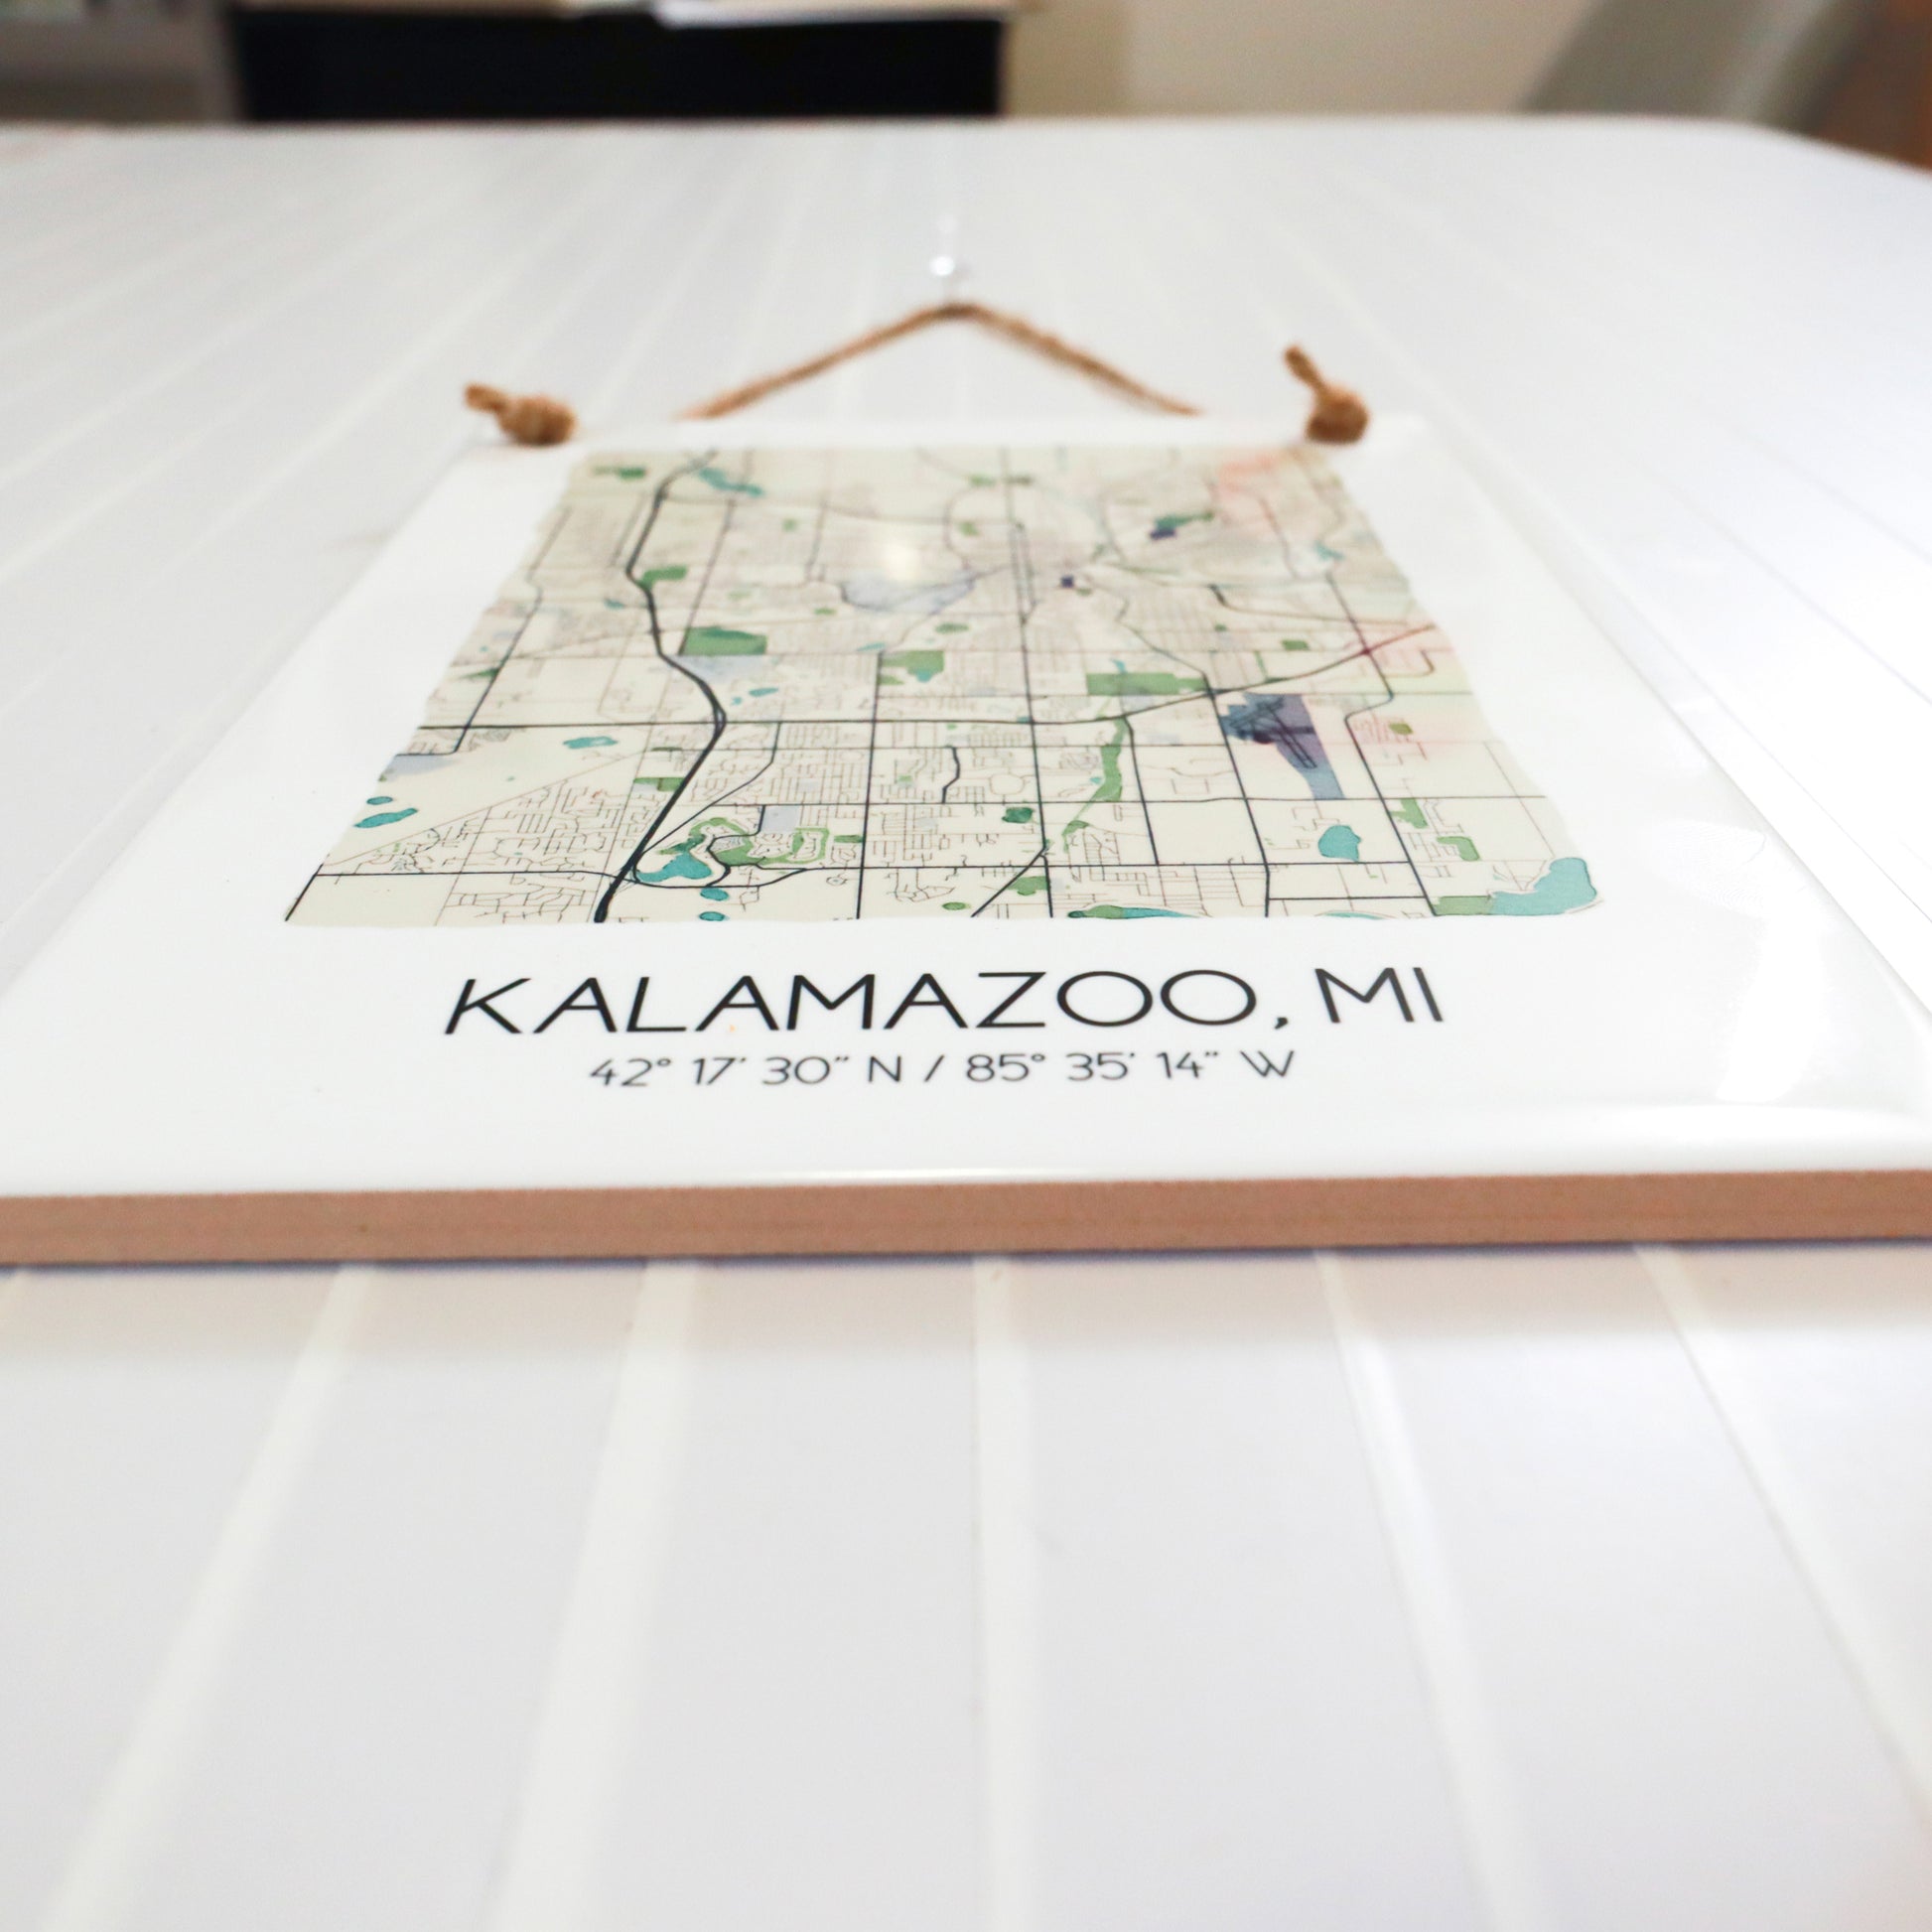 A close-up of a city map tile sign sitting on a table, showing the ceramic tile edges.